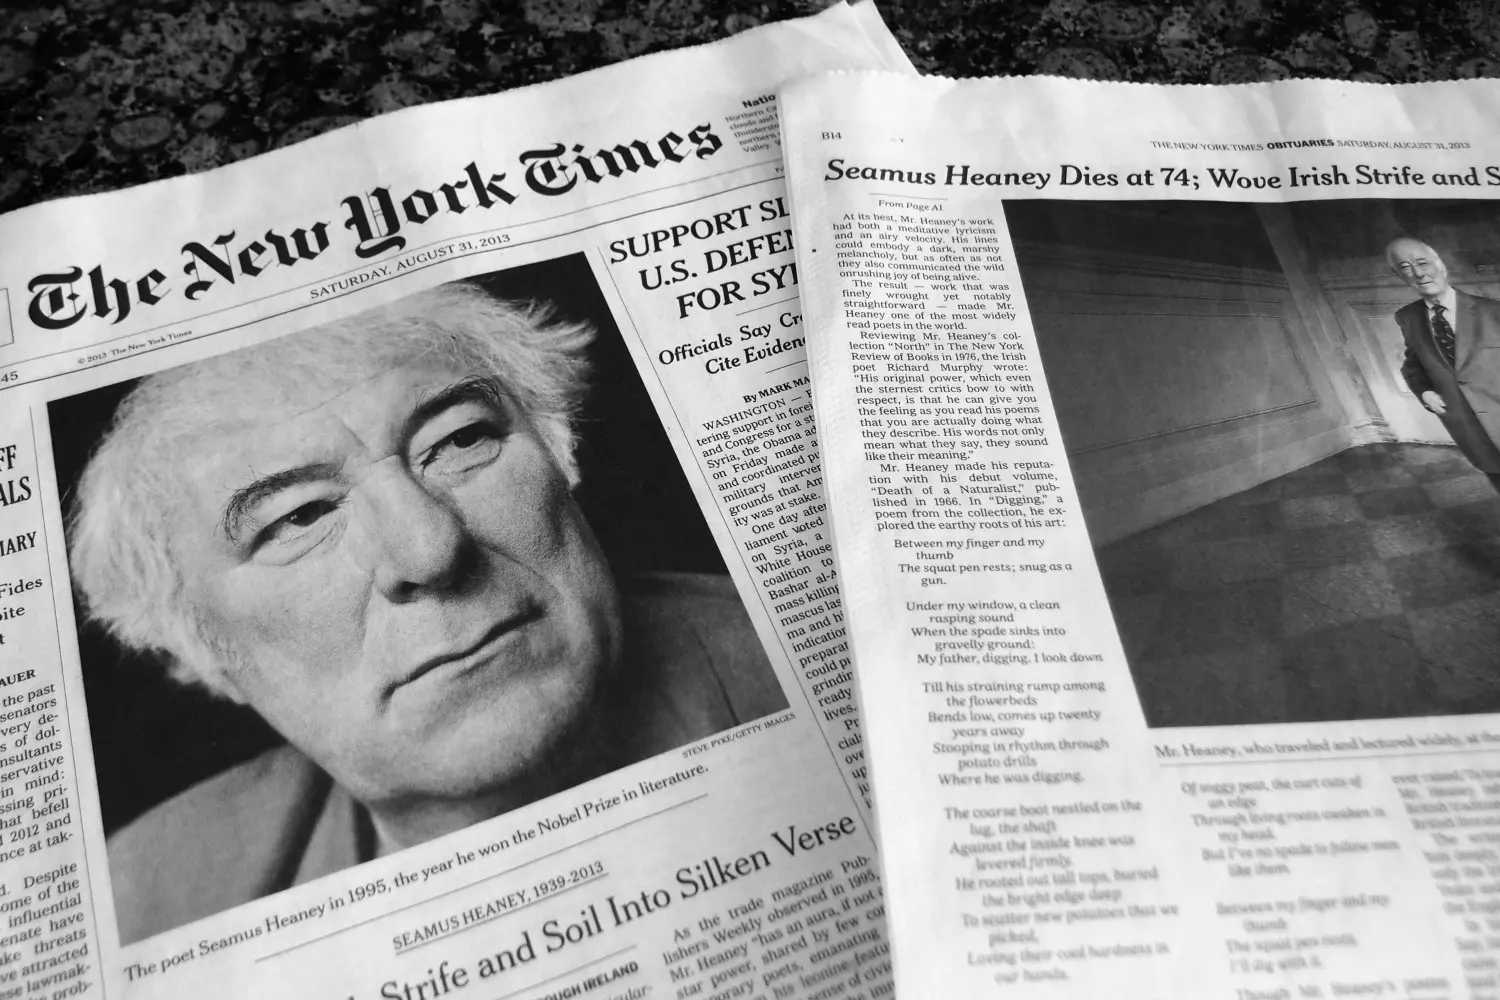 Seamus Heaney Obituary in the New York Times